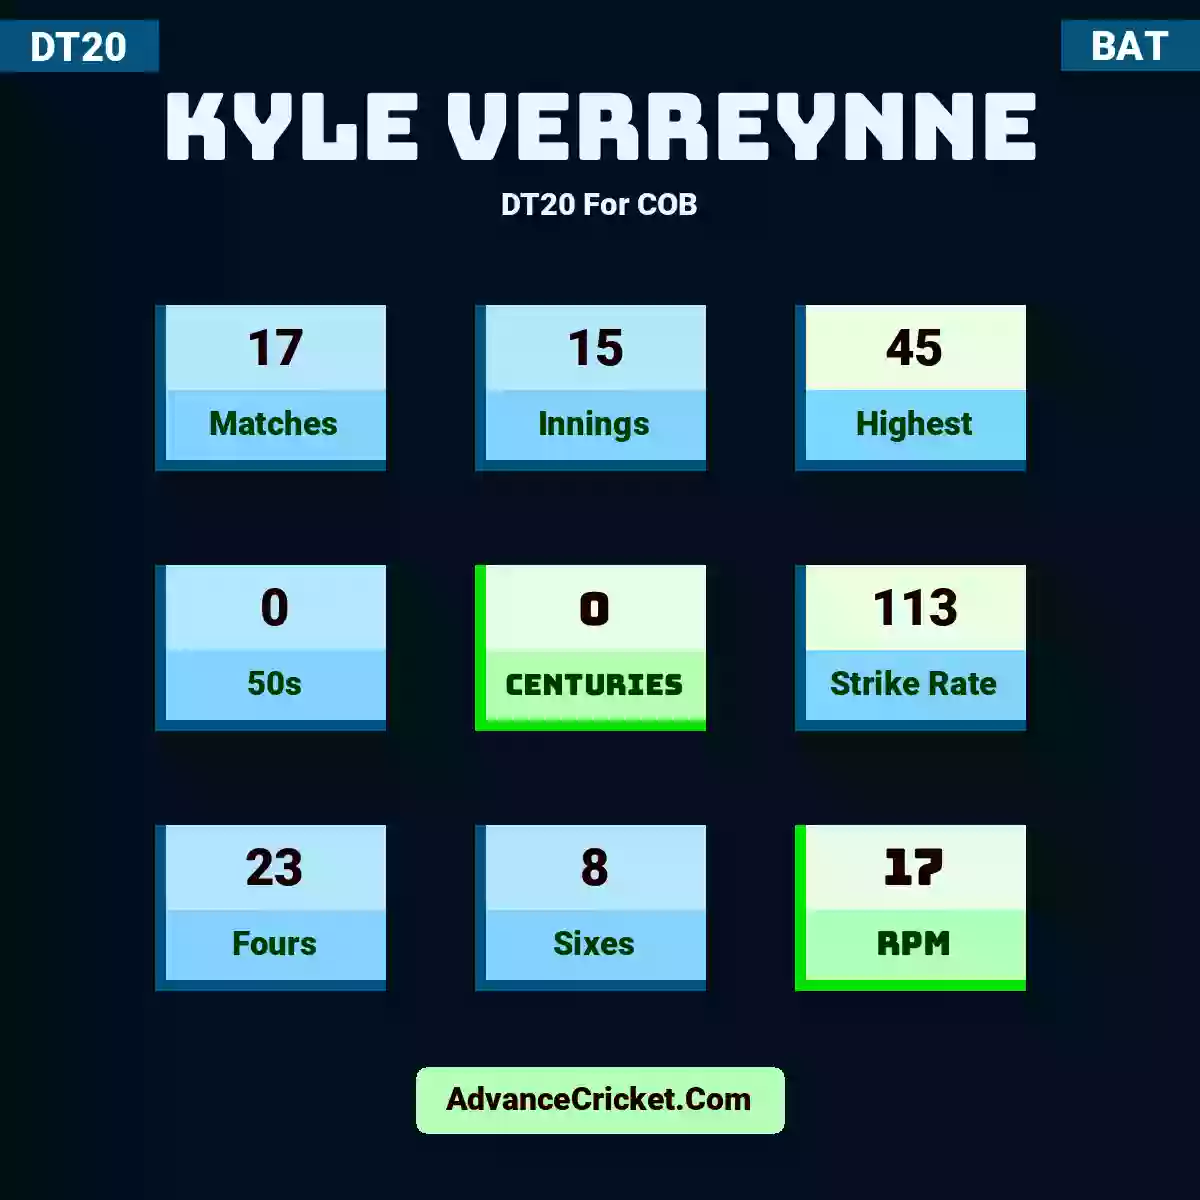 Kyle Verreynne DT20  For COB, Kyle Verreynne played 17 matches, scored 45 runs as highest, 0 half-centuries, and 0 centuries, with a strike rate of 113. K.Verreynne hit 23 fours and 8 sixes, with an RPM of 17.